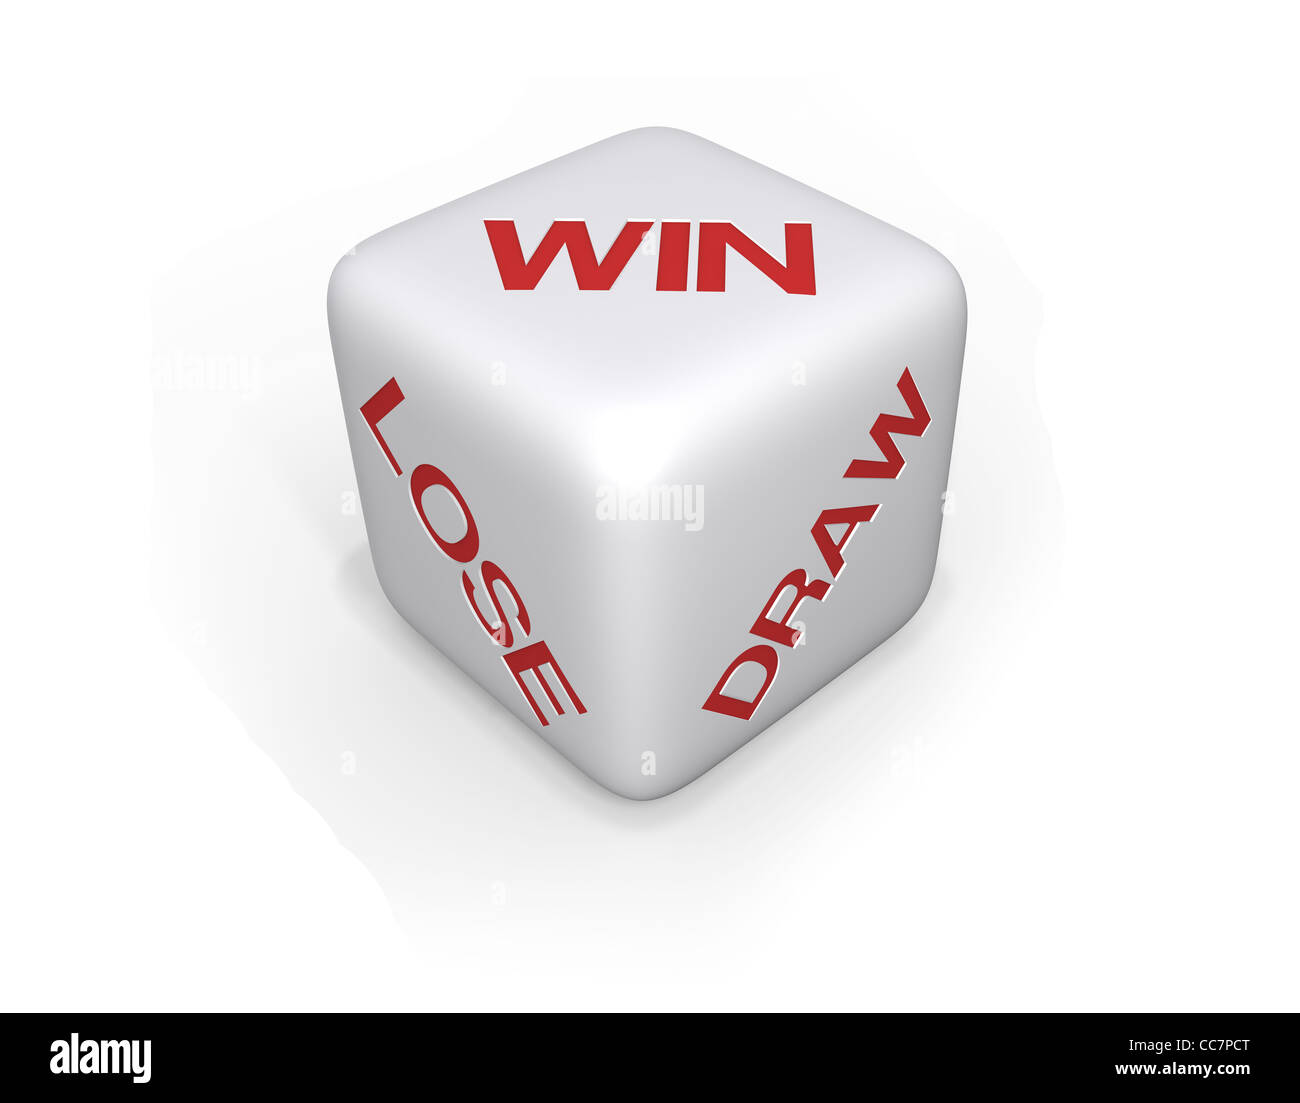 White dice with win, lose and draw in red text on a white background Stock Photo